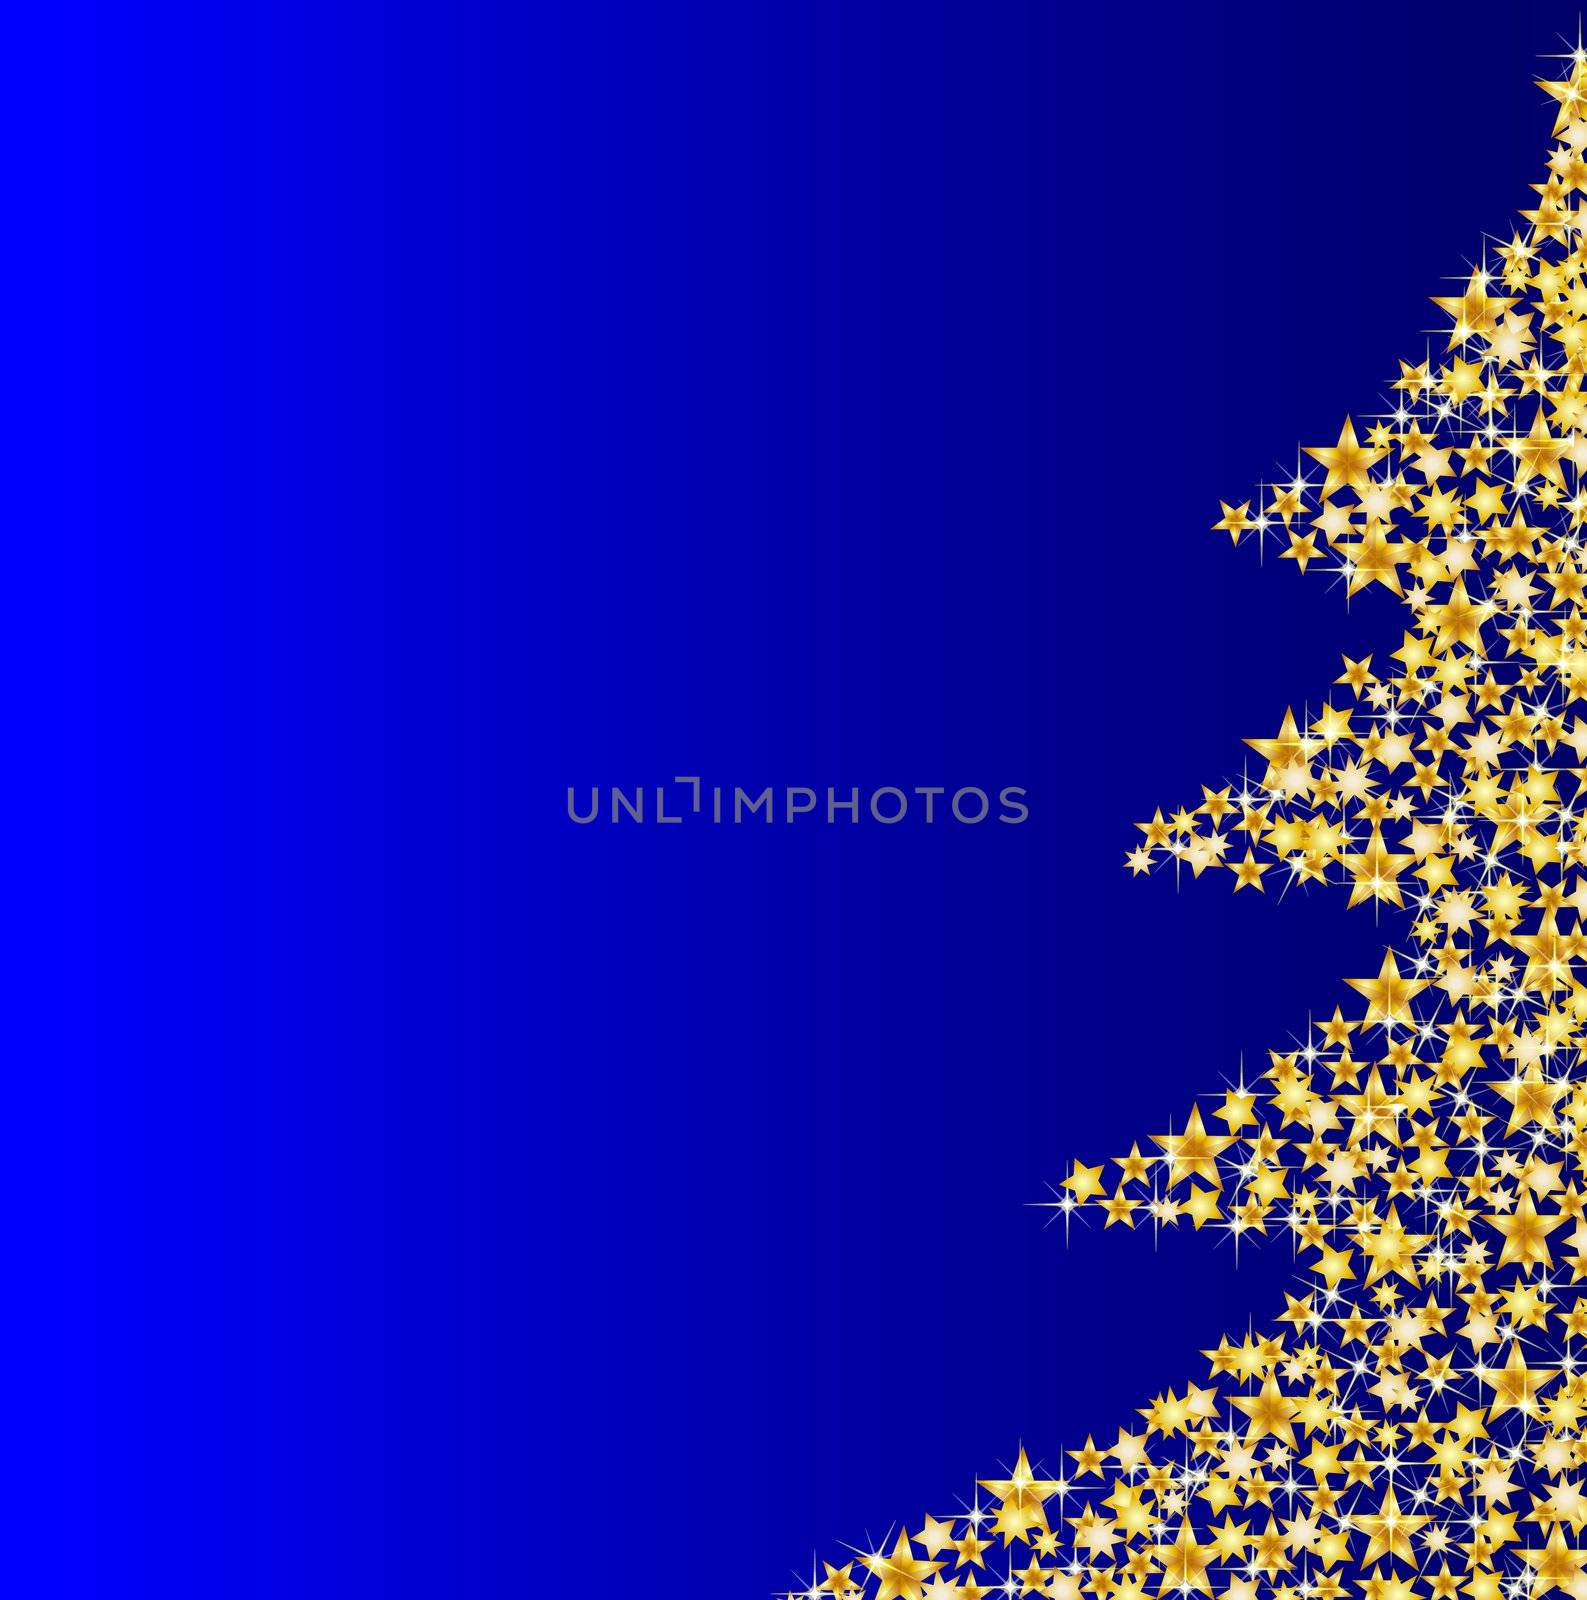 illustration of a christmas tree on blue background